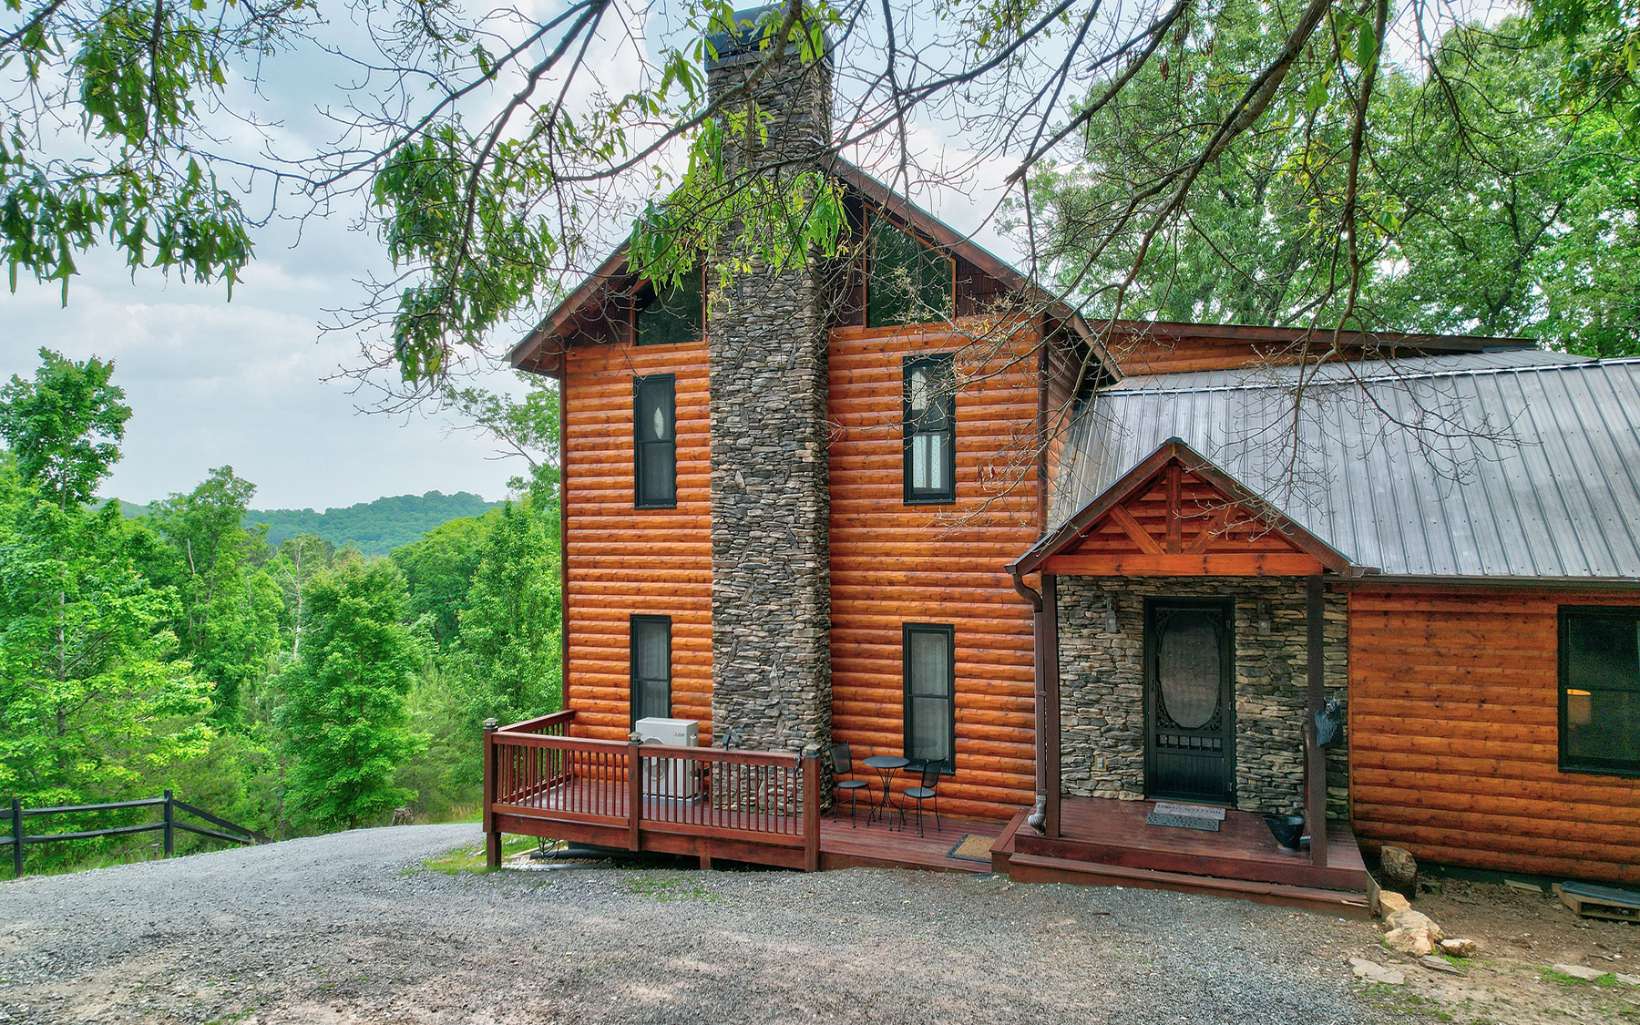 Retreat from the noise and distraction of city life to your tranquil cabin in the North GA mountains where there is plenty of room to roam. This property has 8.4 diverse acres, some wooded for seclusion and some pasture with a small creek and chicken coop, perfect for a few farm animals. This home has 3 bedrooms plus a small sleeping loft perfect for the kiddos, and a finished workshop or extra sleeping space with half bath in the basement. The upstairs master suite is vast with a cedar walk in closet and private covered porch with a peekaboo long range view of the mountains. There is a game room space as well on the main level complete with a shuffleboard table for endless entertainment. This home is sold furnished and would make an excellent STR/vacation rental. Just a 4 minute drive to Horseshoe Bend Park at the Toccoa River for kayaking, fly fishing and tubing and a 20 minute drive to downtown Blue Ridge.